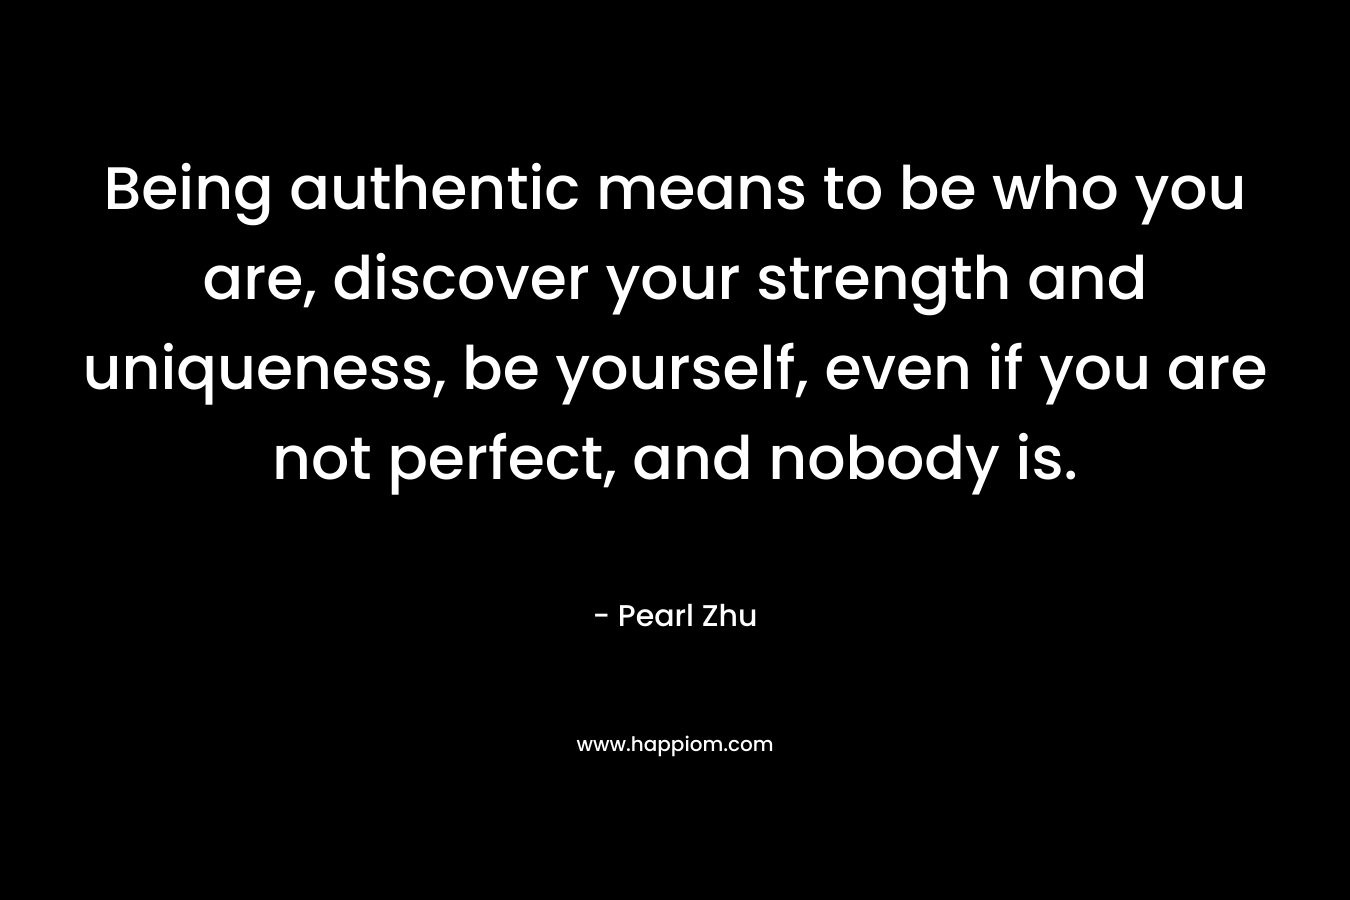 Being authentic means to be who you are, discover your strength and uniqueness, be yourself, even if you are not perfect, and nobody is.